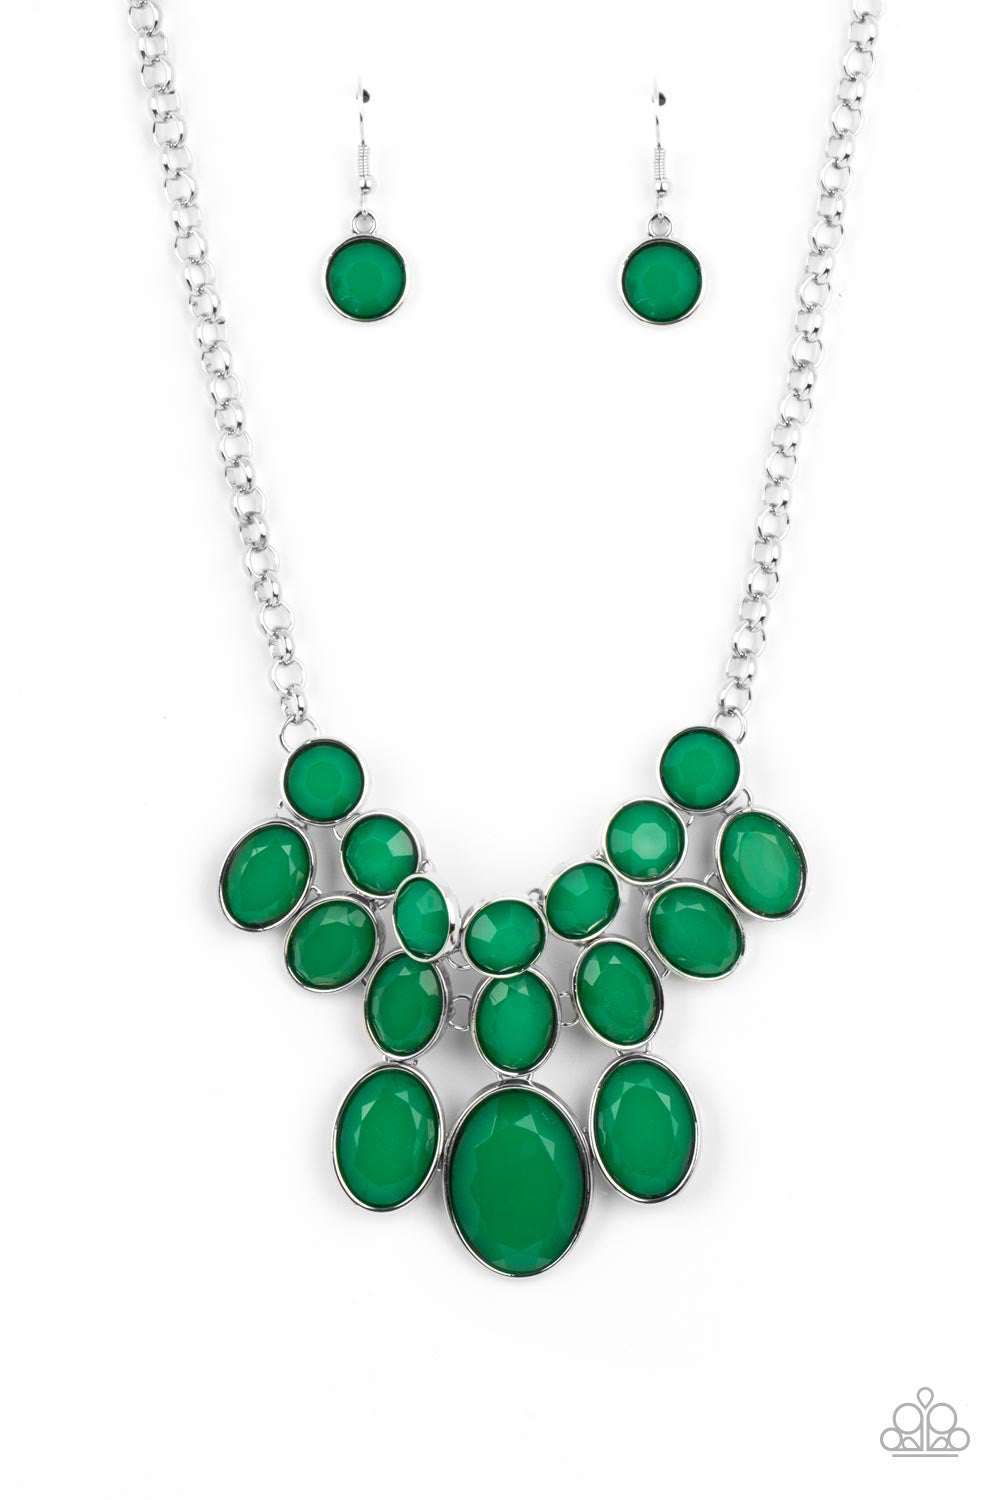 Bead Necklace - Paparazzi Delectable Daydream - Green Necklace Paparazzi jewelry image